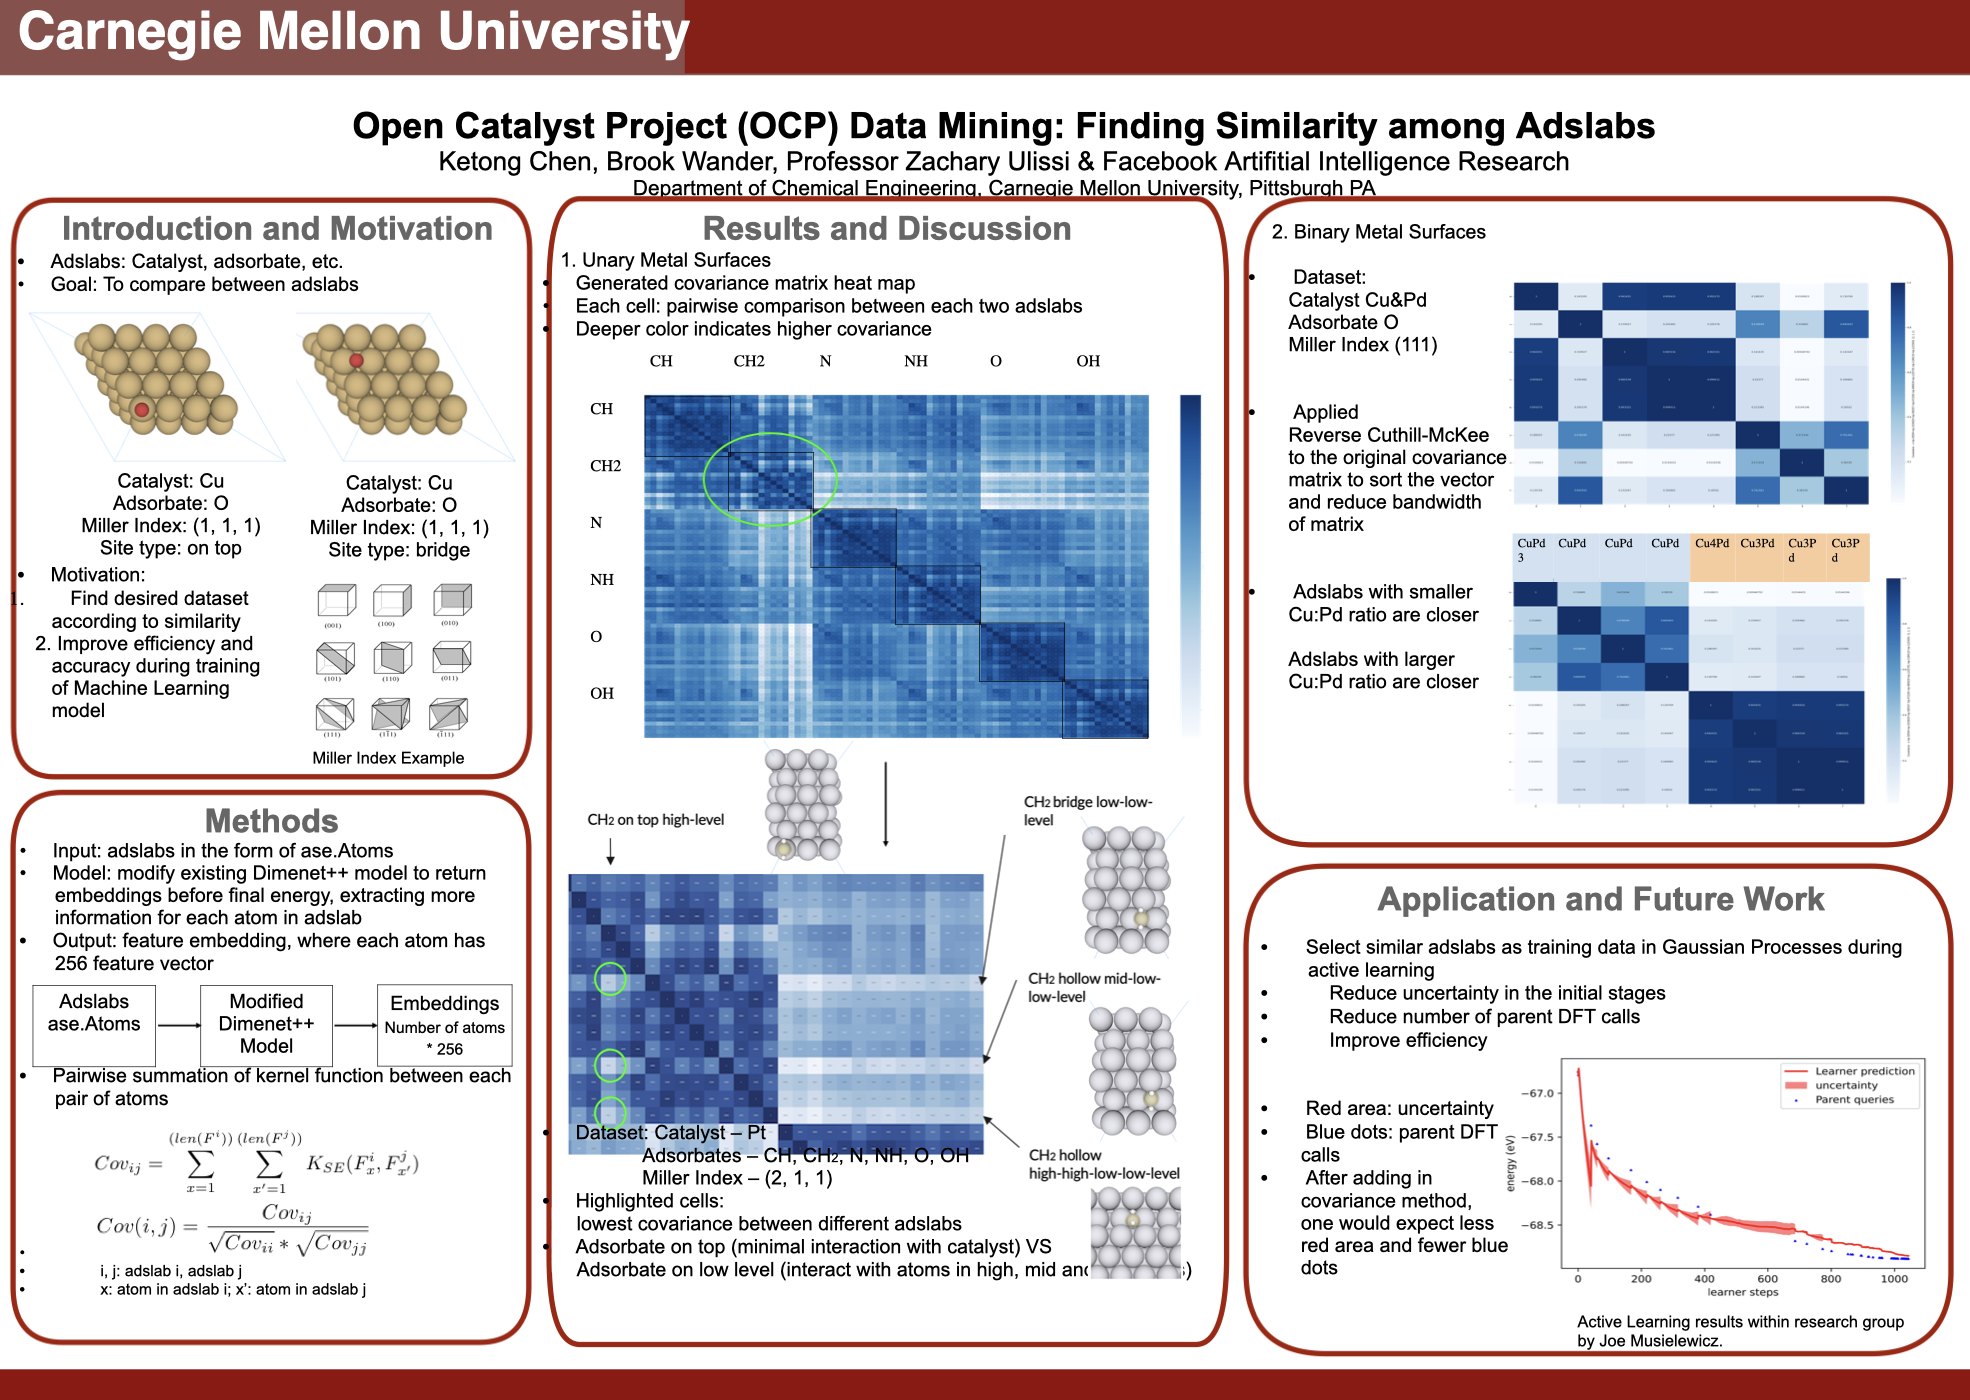 Keton Chen's research poster which will be presented at the AIChE Conference in November.